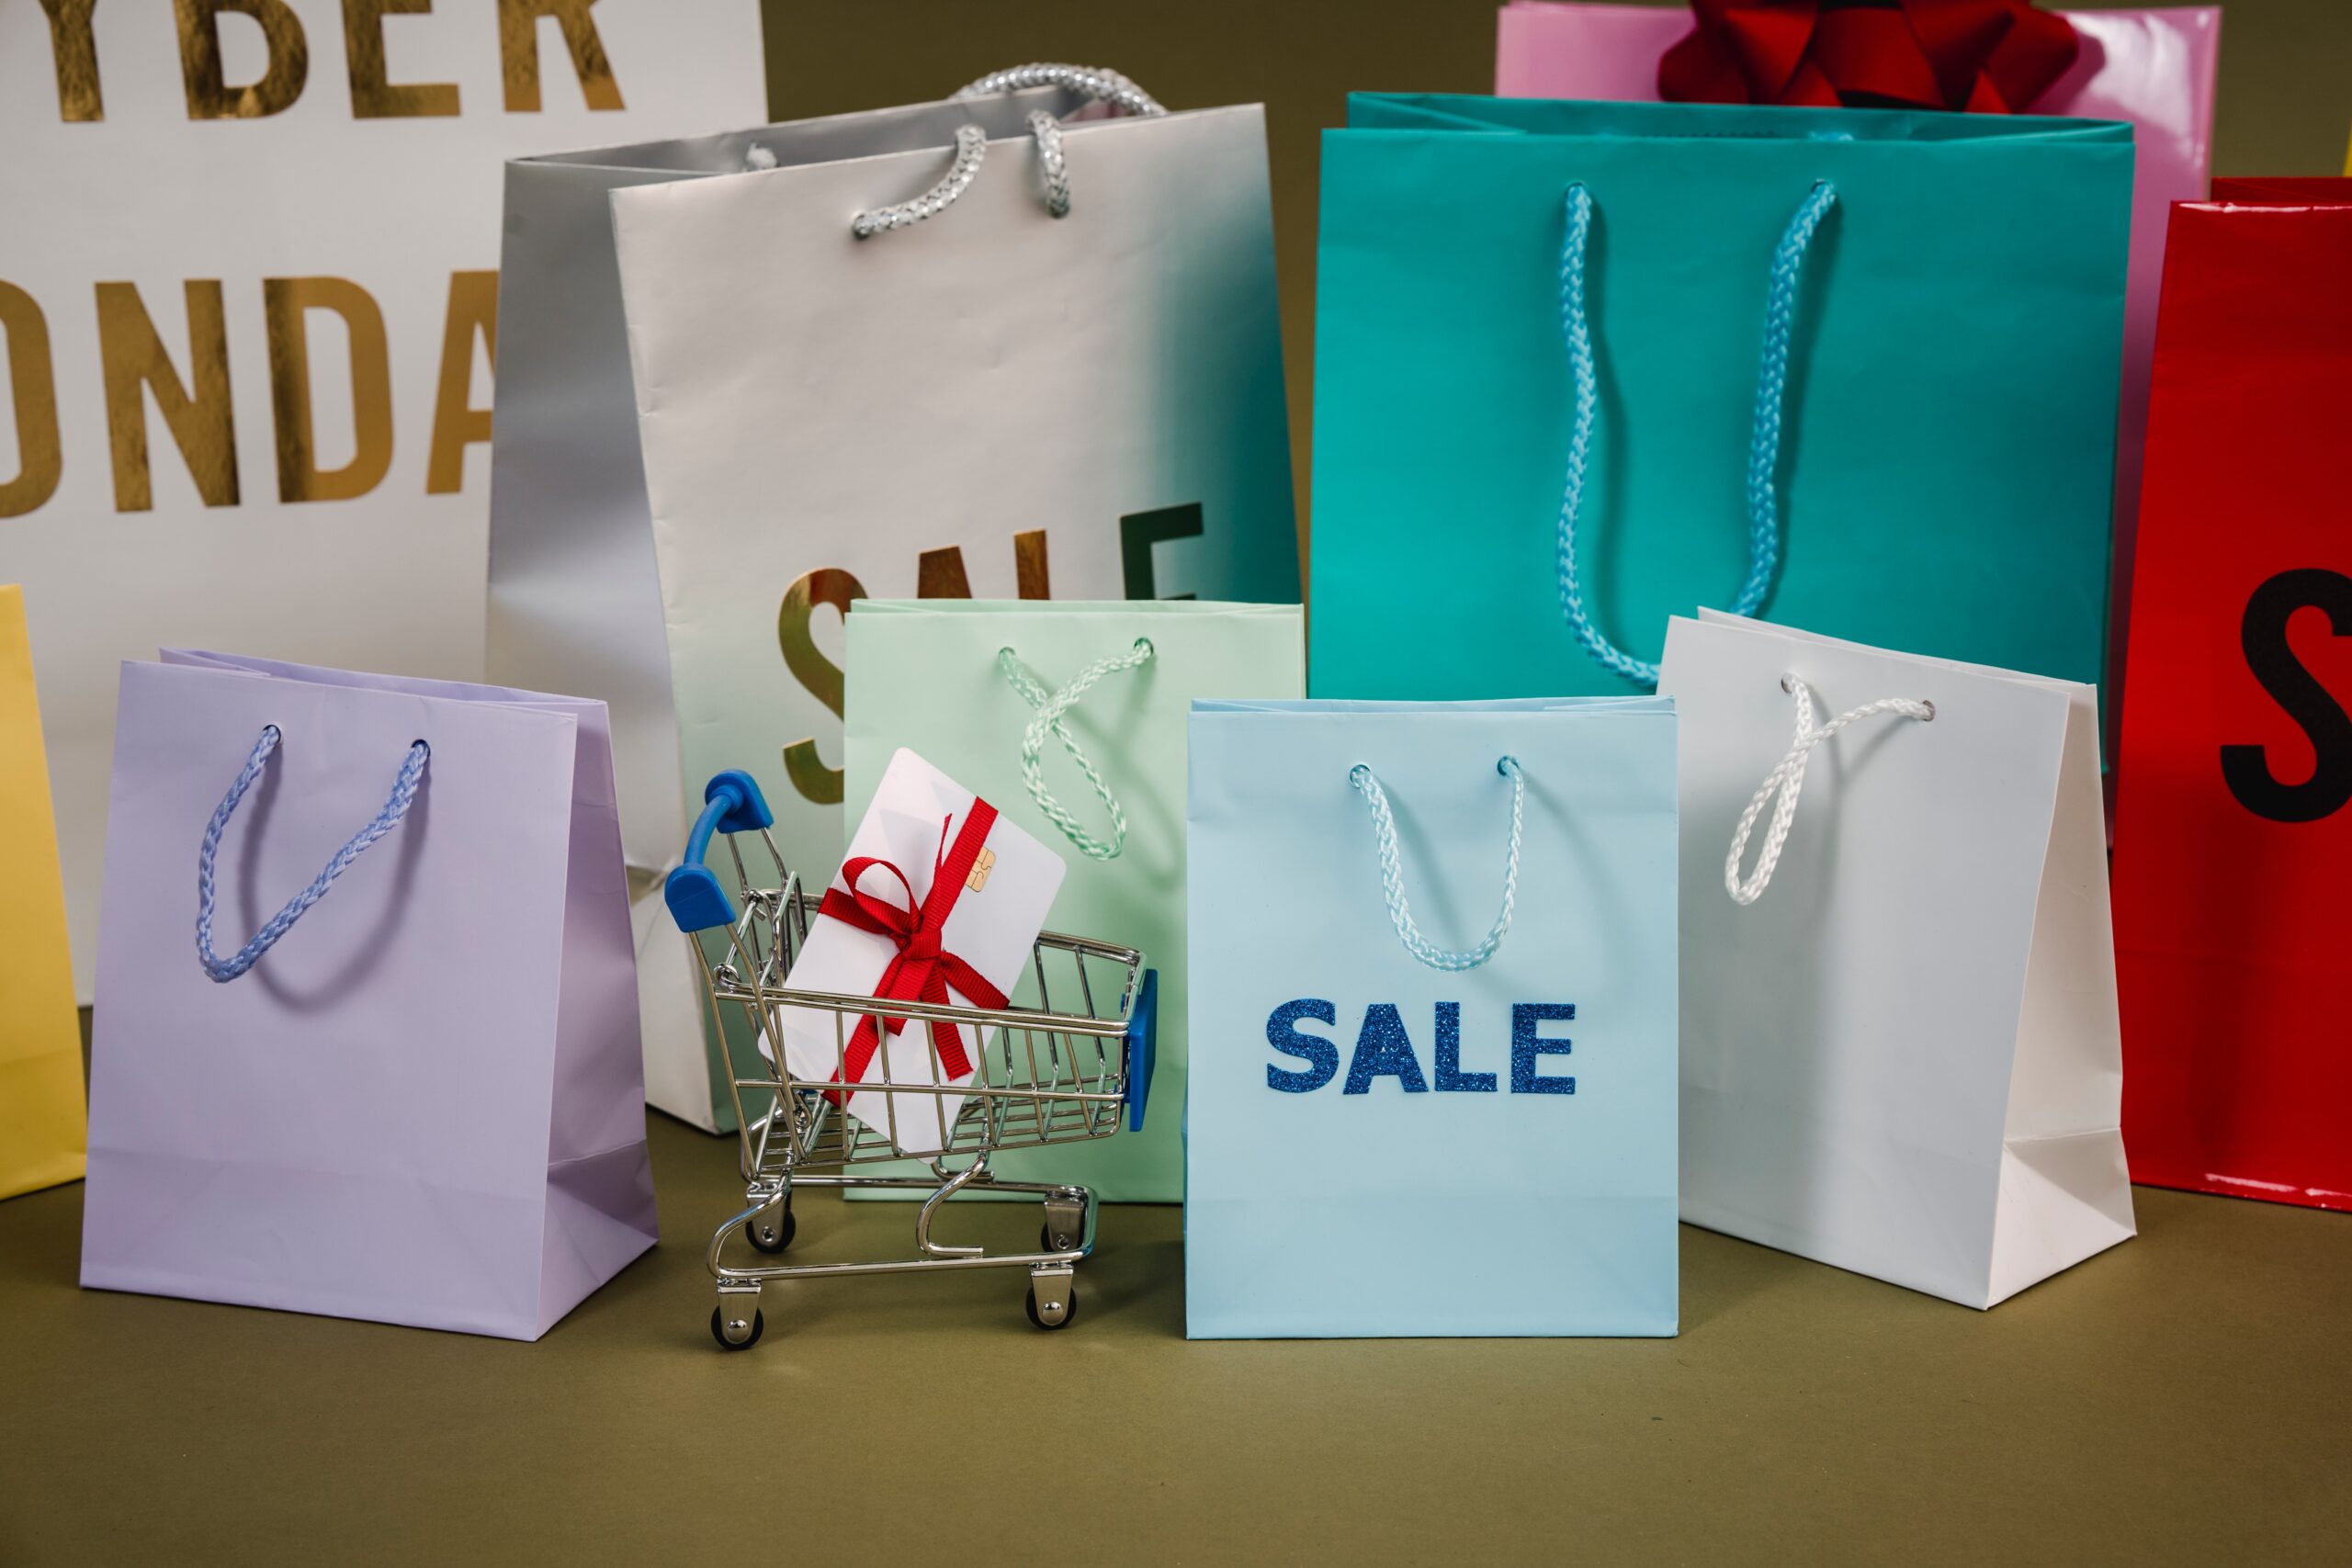 Shopping bags with sale written on them